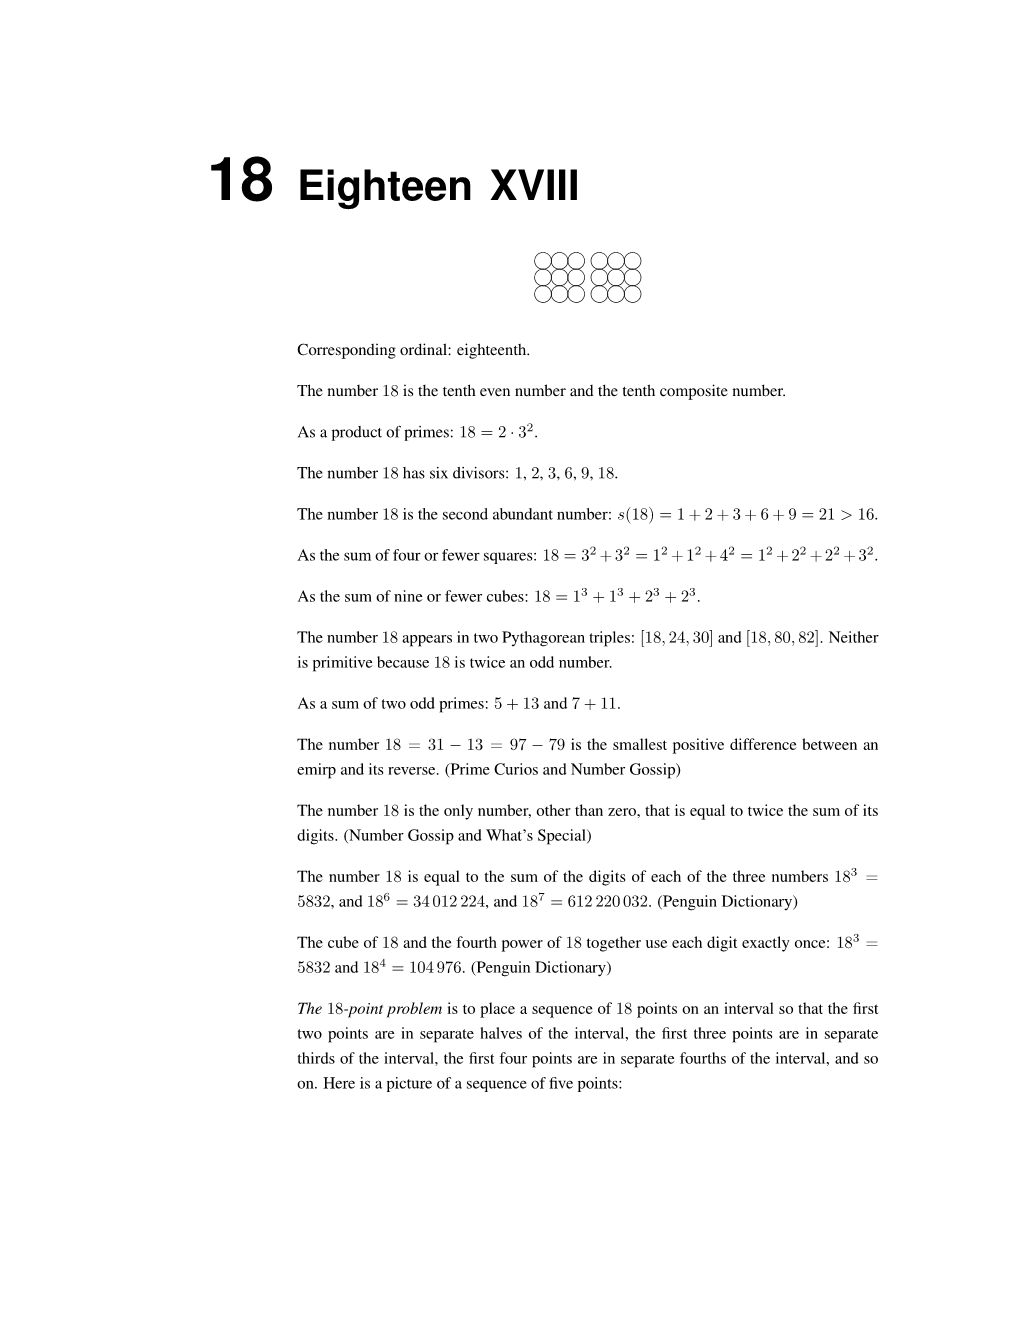 Number 18 Is the Tenth Even Number and the Tenth Composite Number